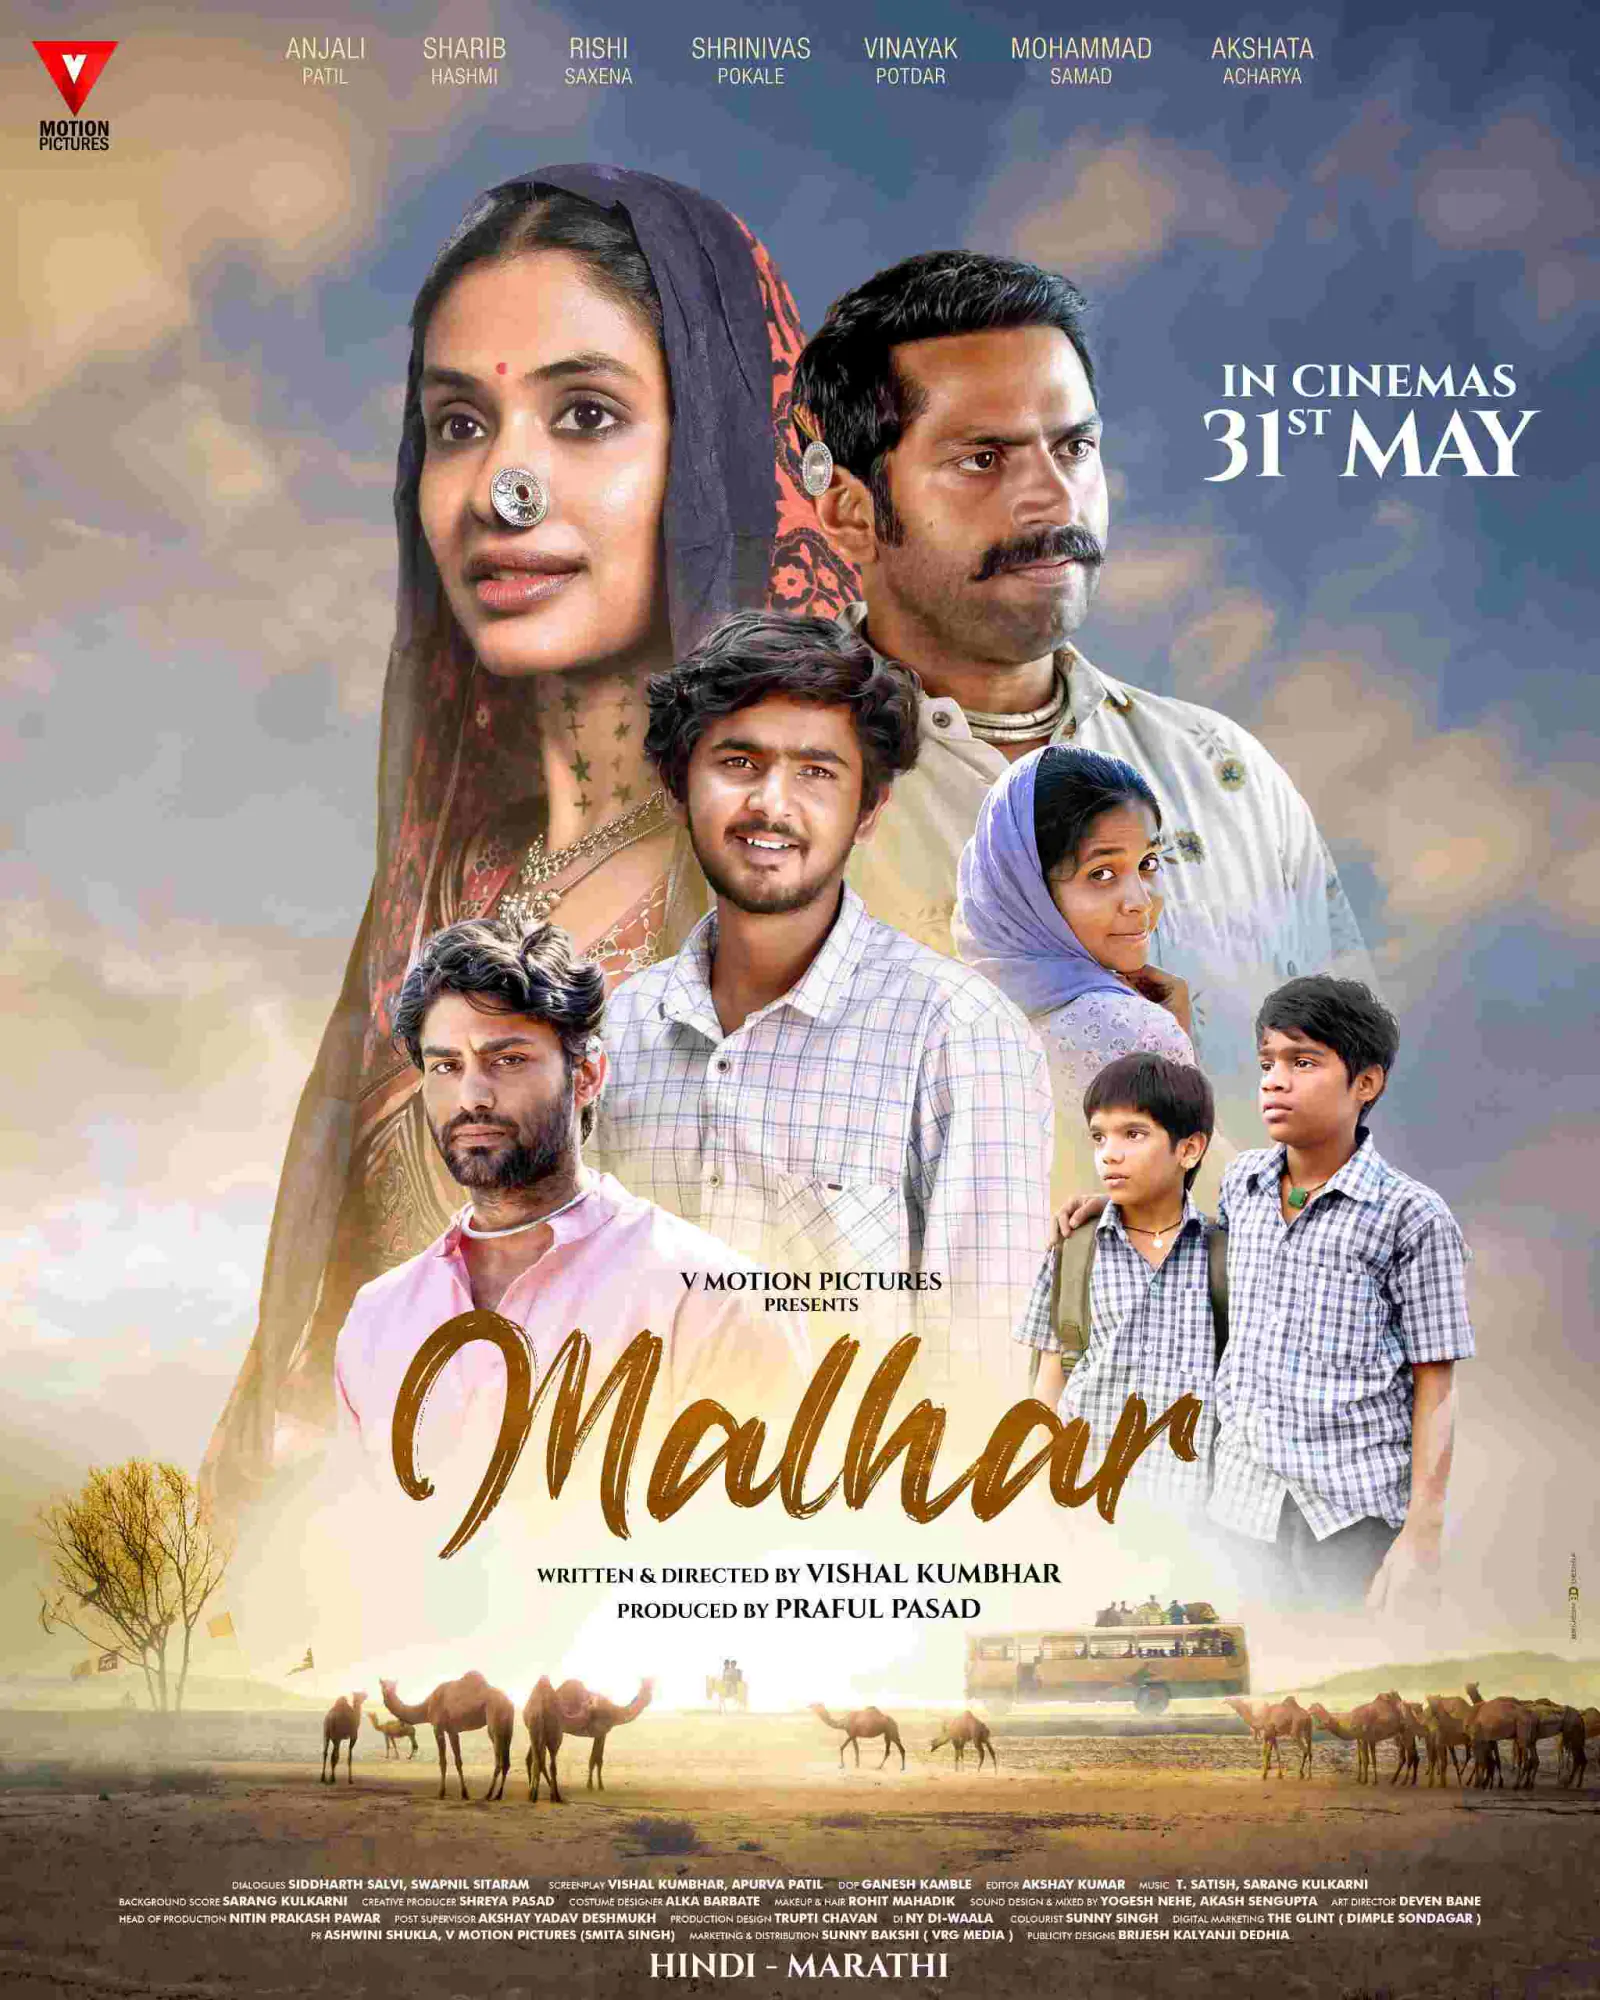 Anjali Patil and Sharib Hashmi starrer film 'Malhar' poster launched, to be released in Hindi and Marathi on May 31